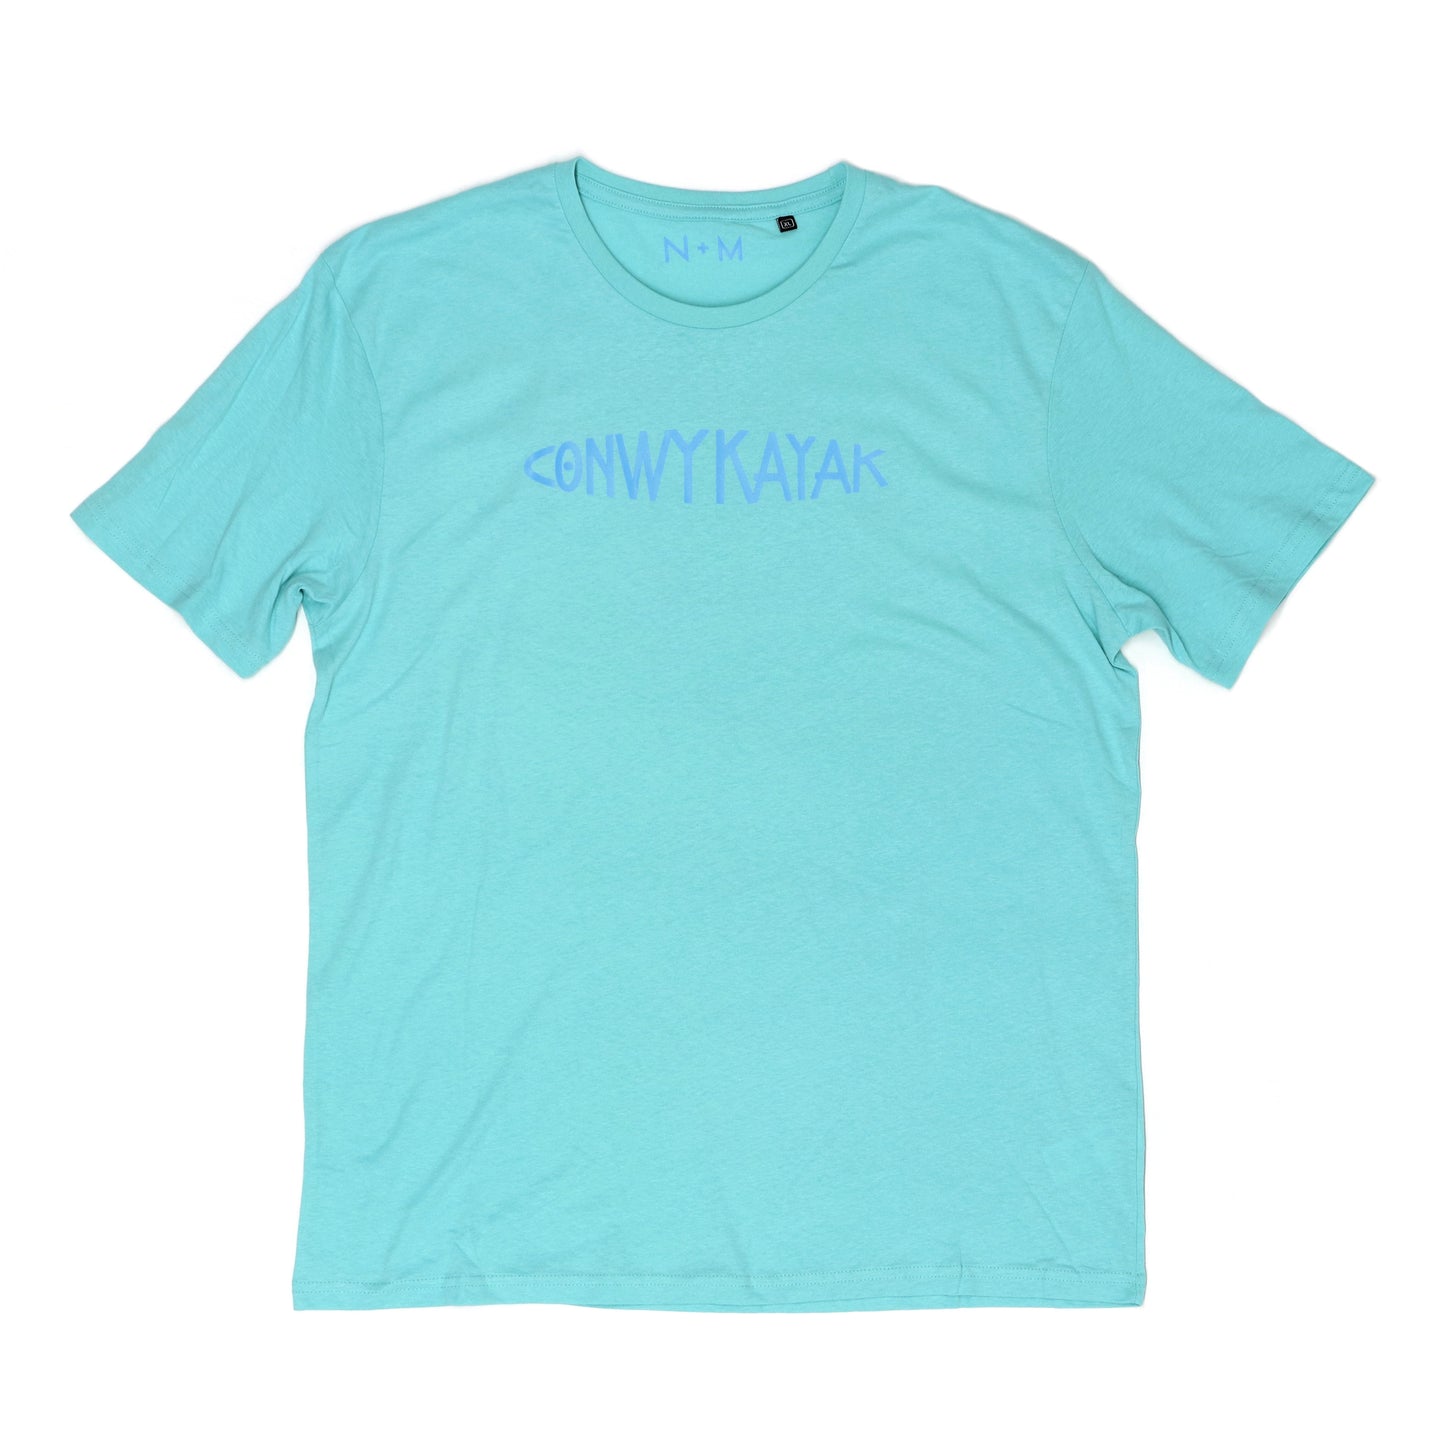 Conwy Kayak - Peppermint Short Sleeve T-Shirt | Conwy Kayaks